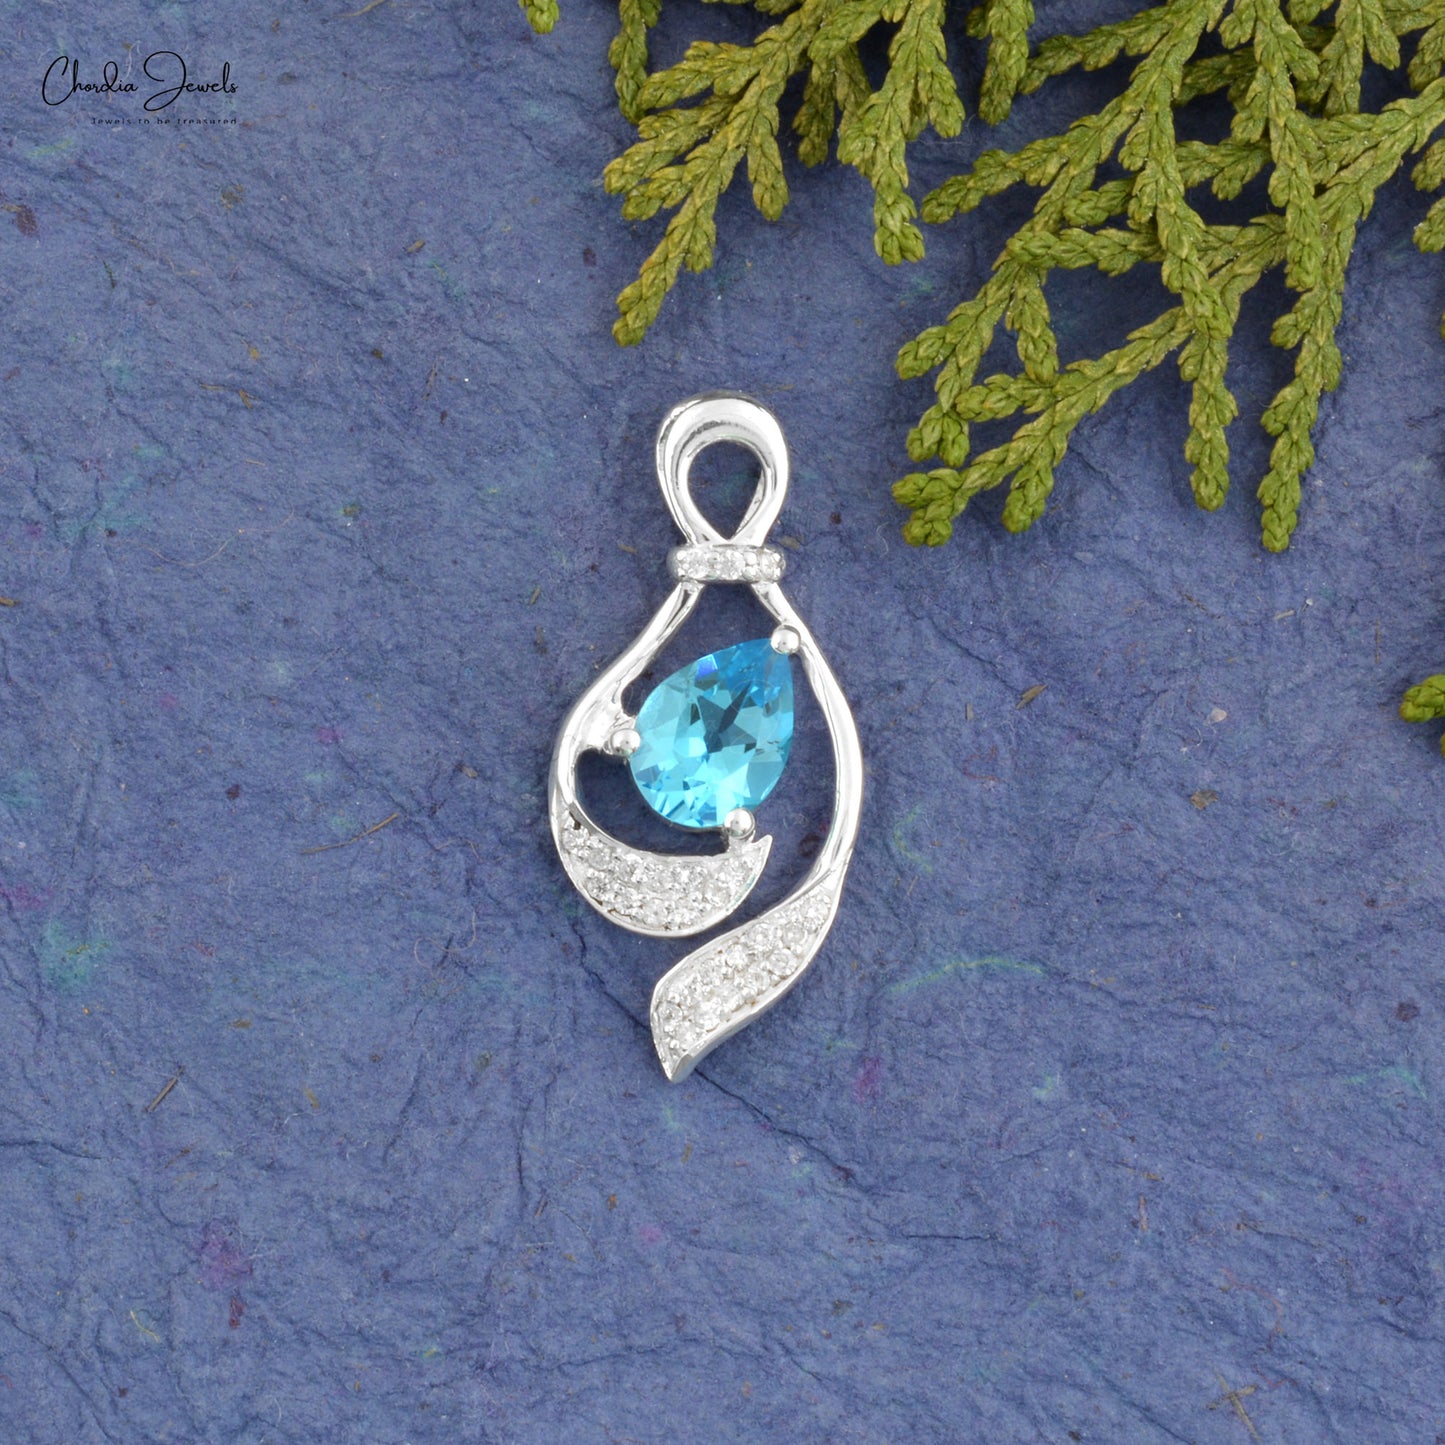 Natural Swiss Blue Topaz Pendant AAA Quality Jewelry At Offer Price 925 Sterling Silver December Birthstone Jewelry